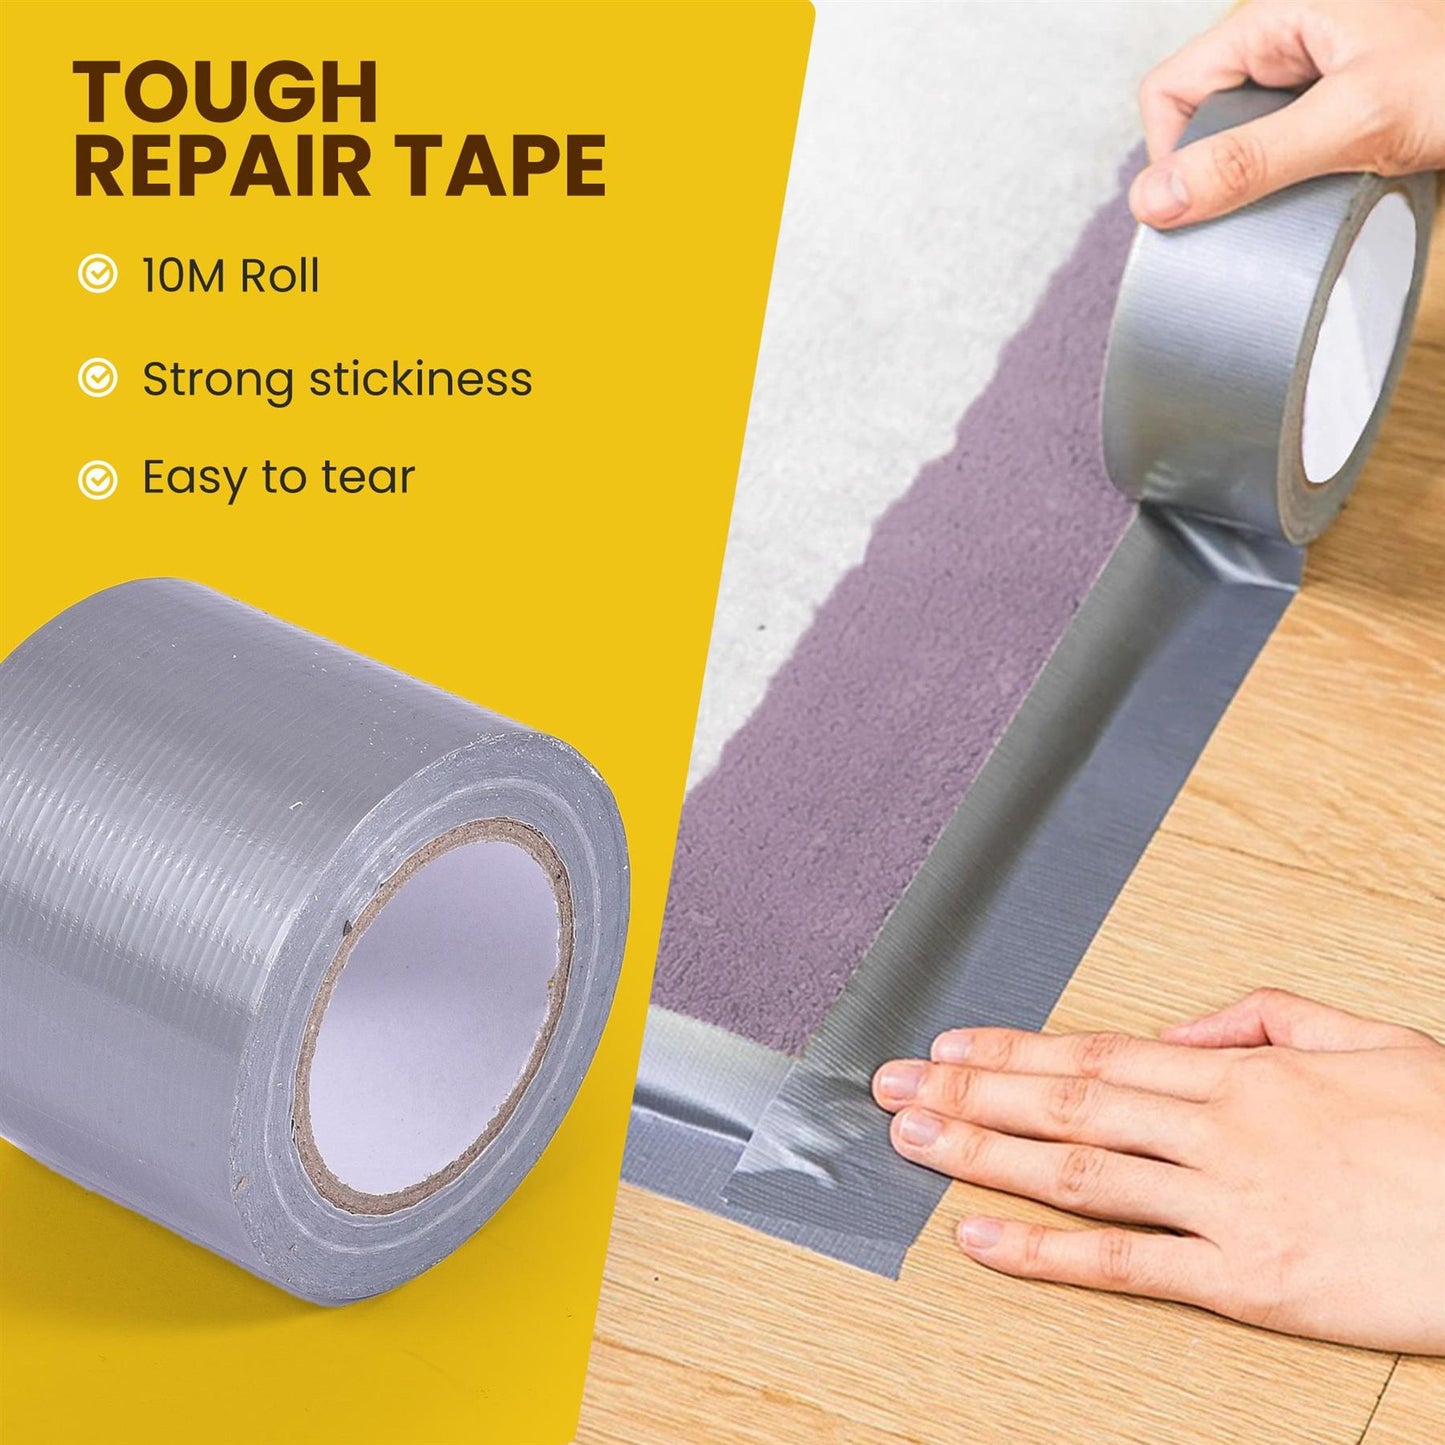 Heavy-Duty Repair Tape For Tents And Groundsheets Tough Fixing Tape